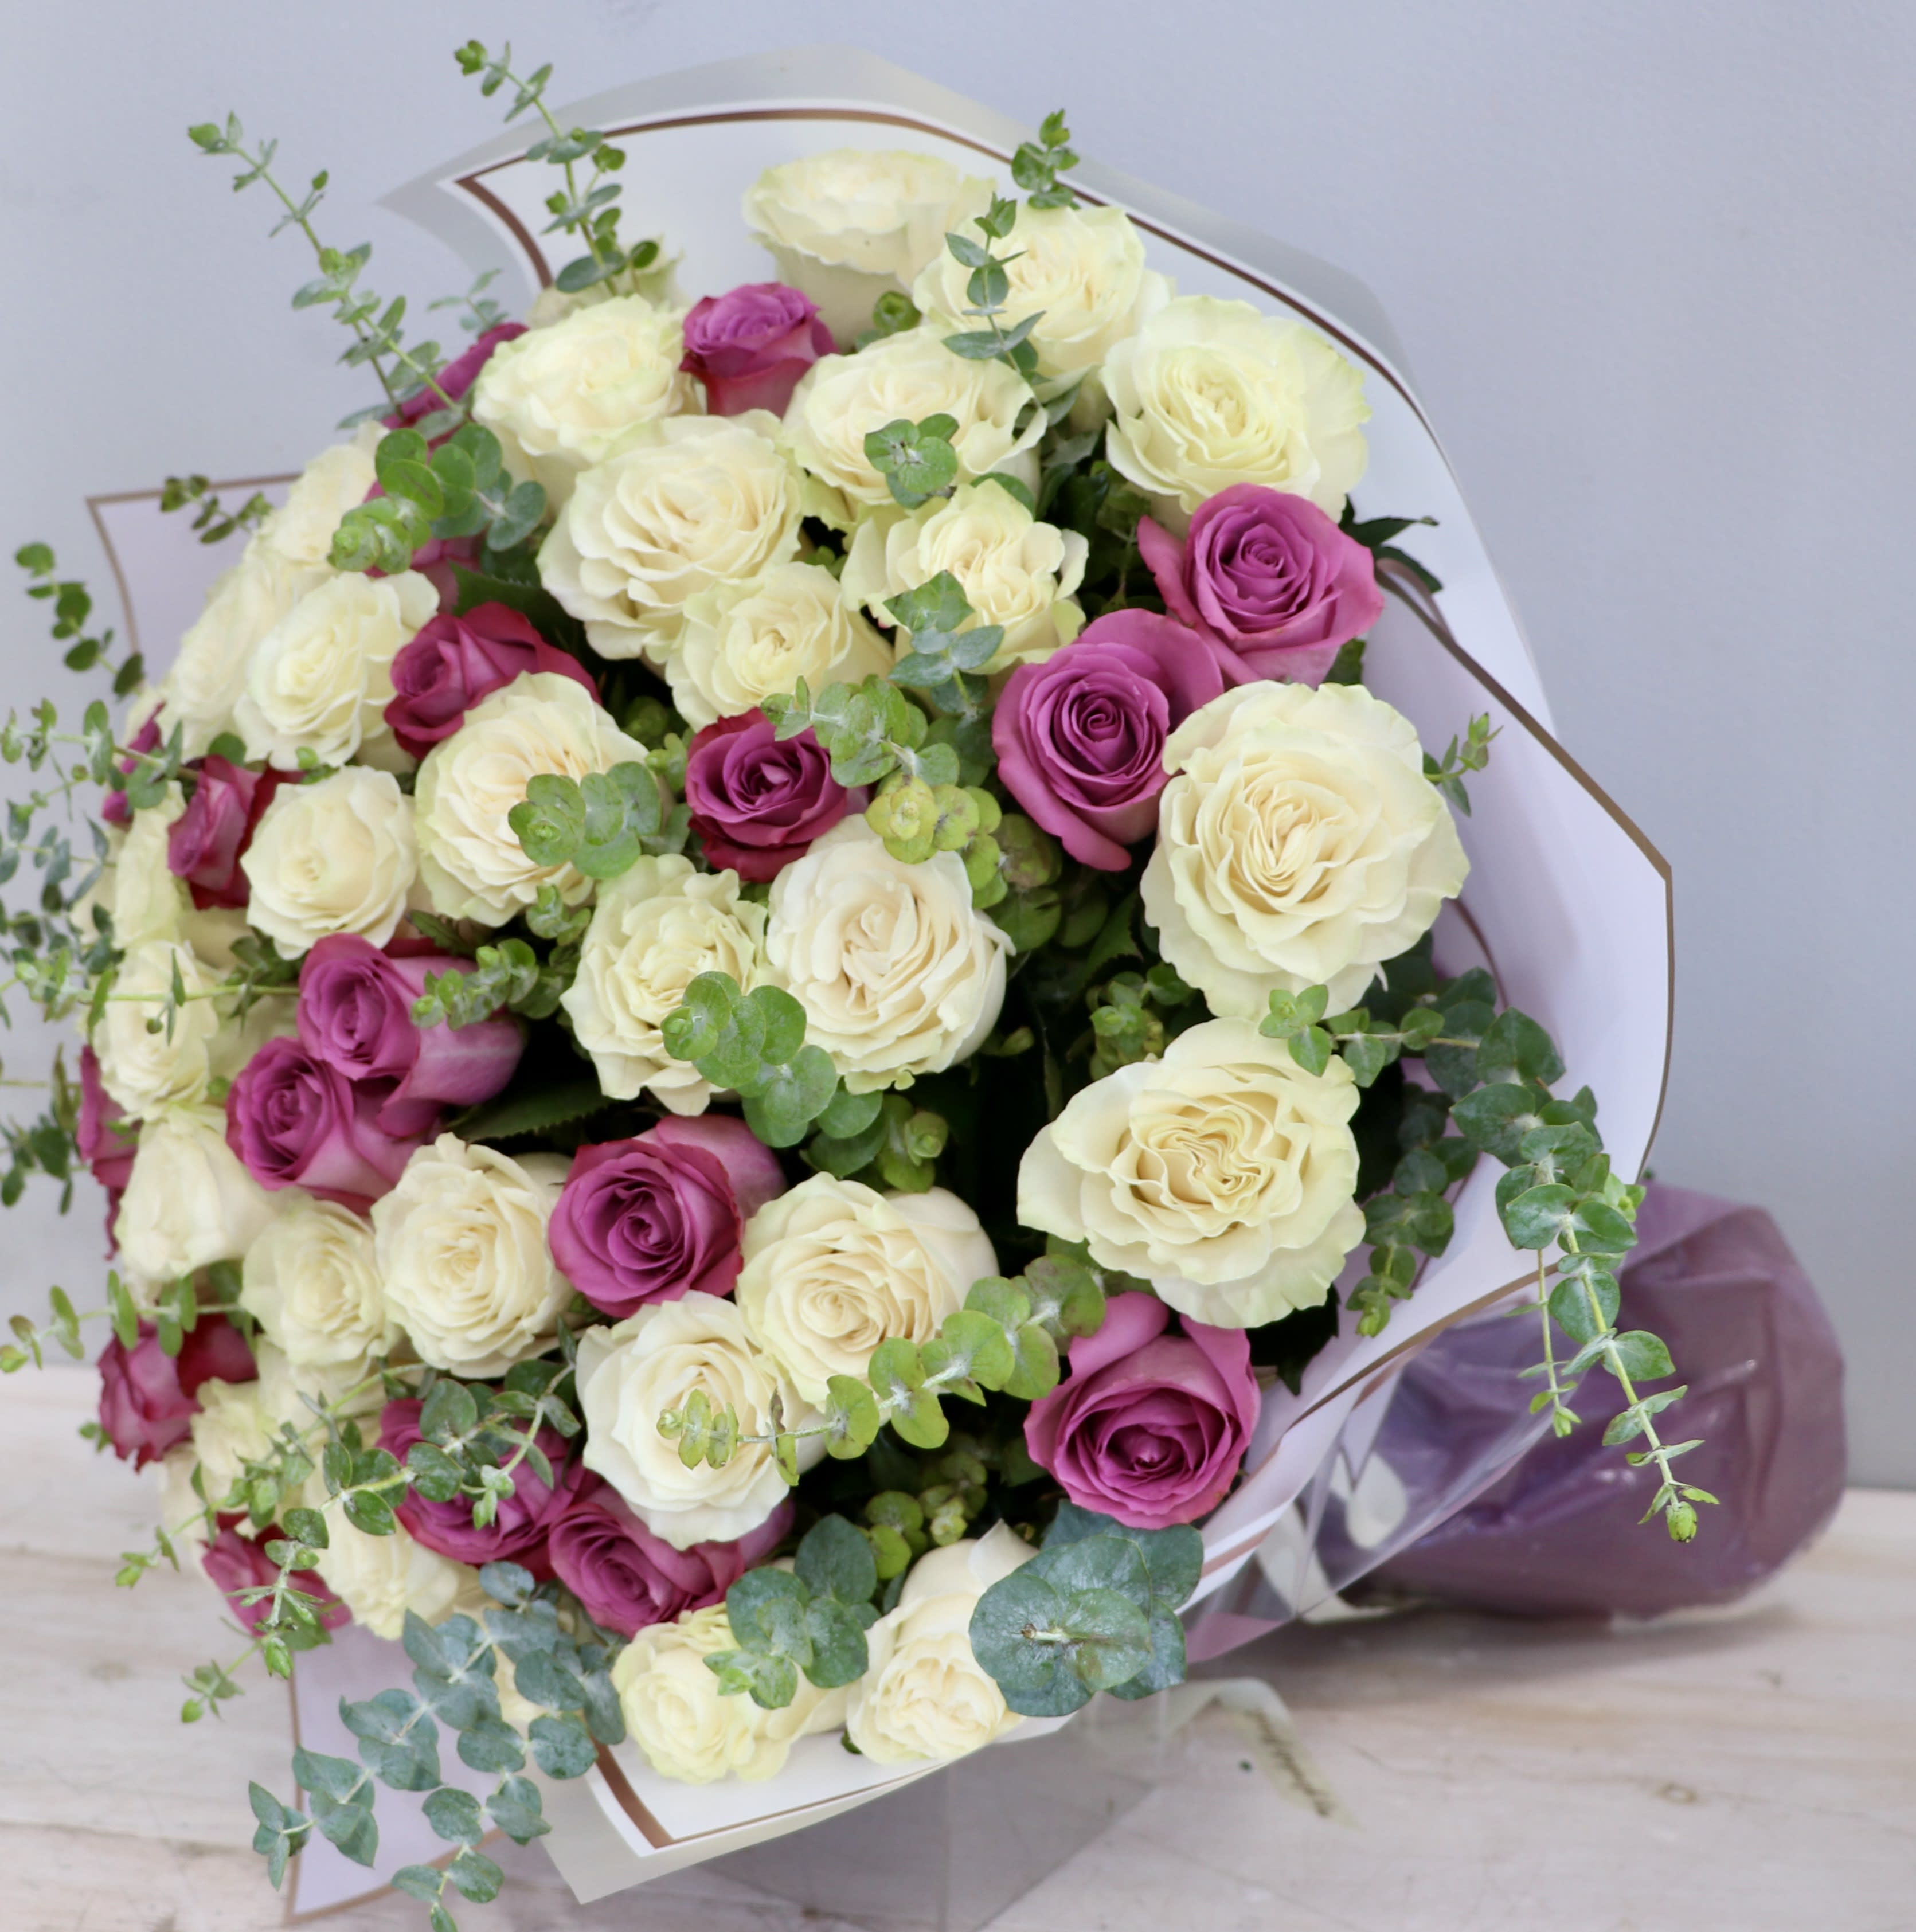 White and Purple Rose Bouquet - My Glendale Florist - This large bouquet is made with beautiful white and purple roses and eucalyptus accents.